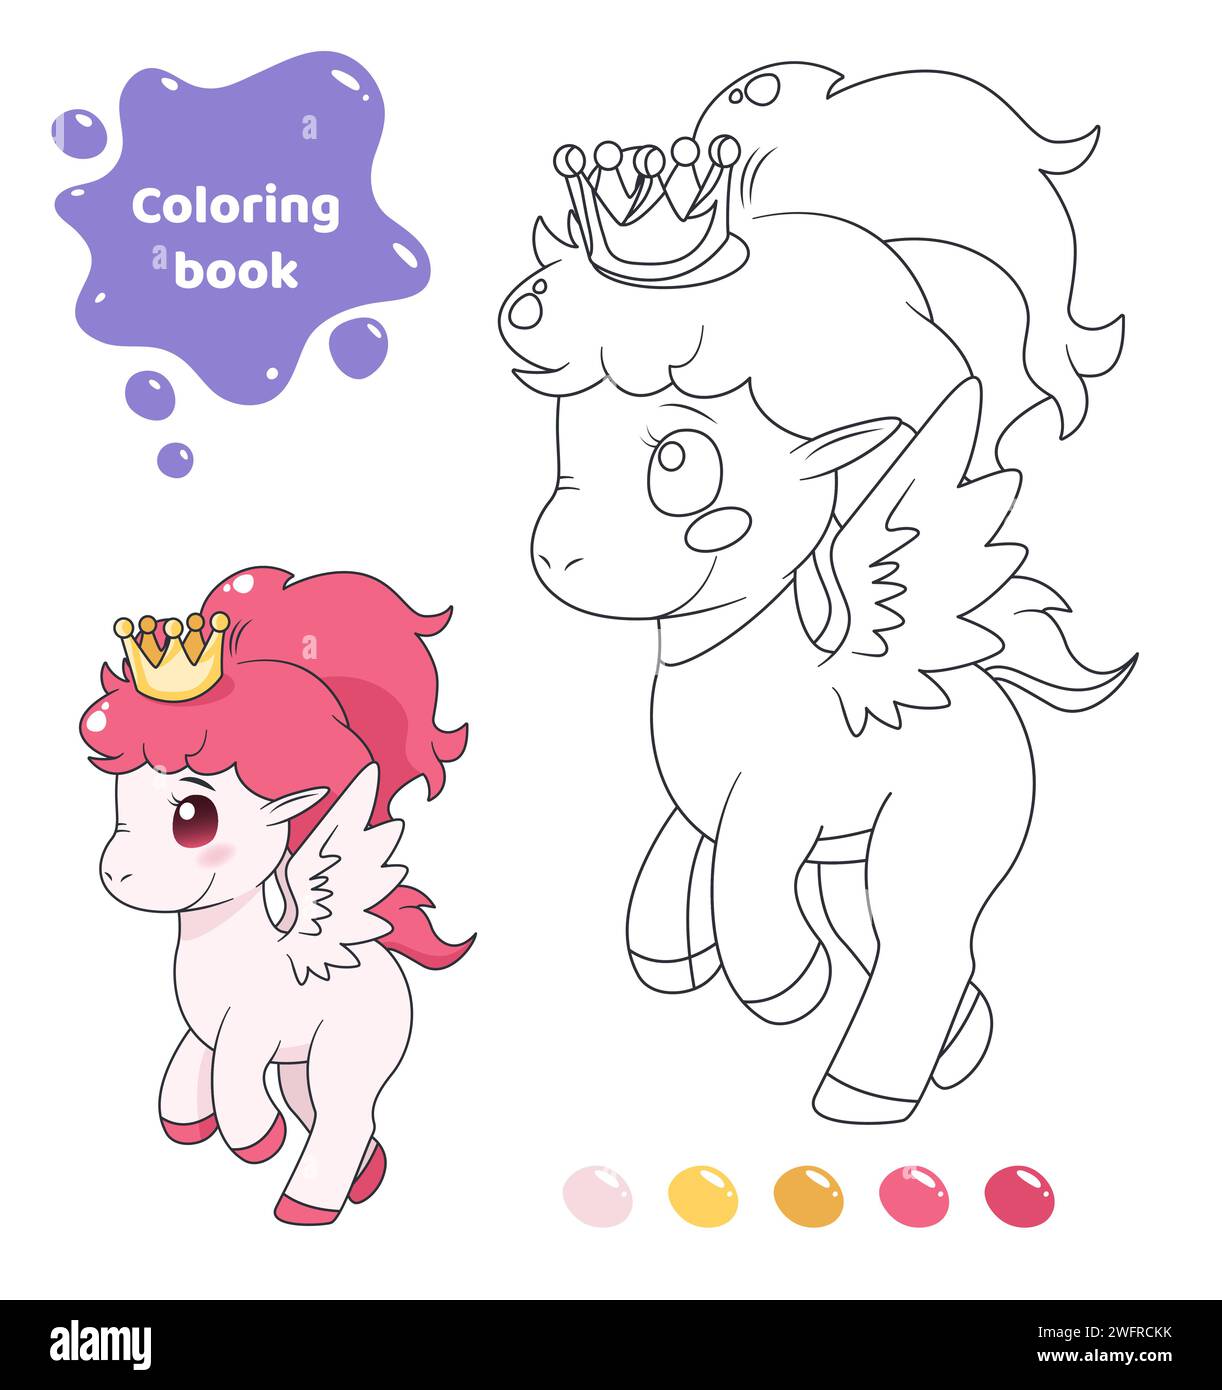 Coloring book for kids. Cute pony with crown. Stock Vector